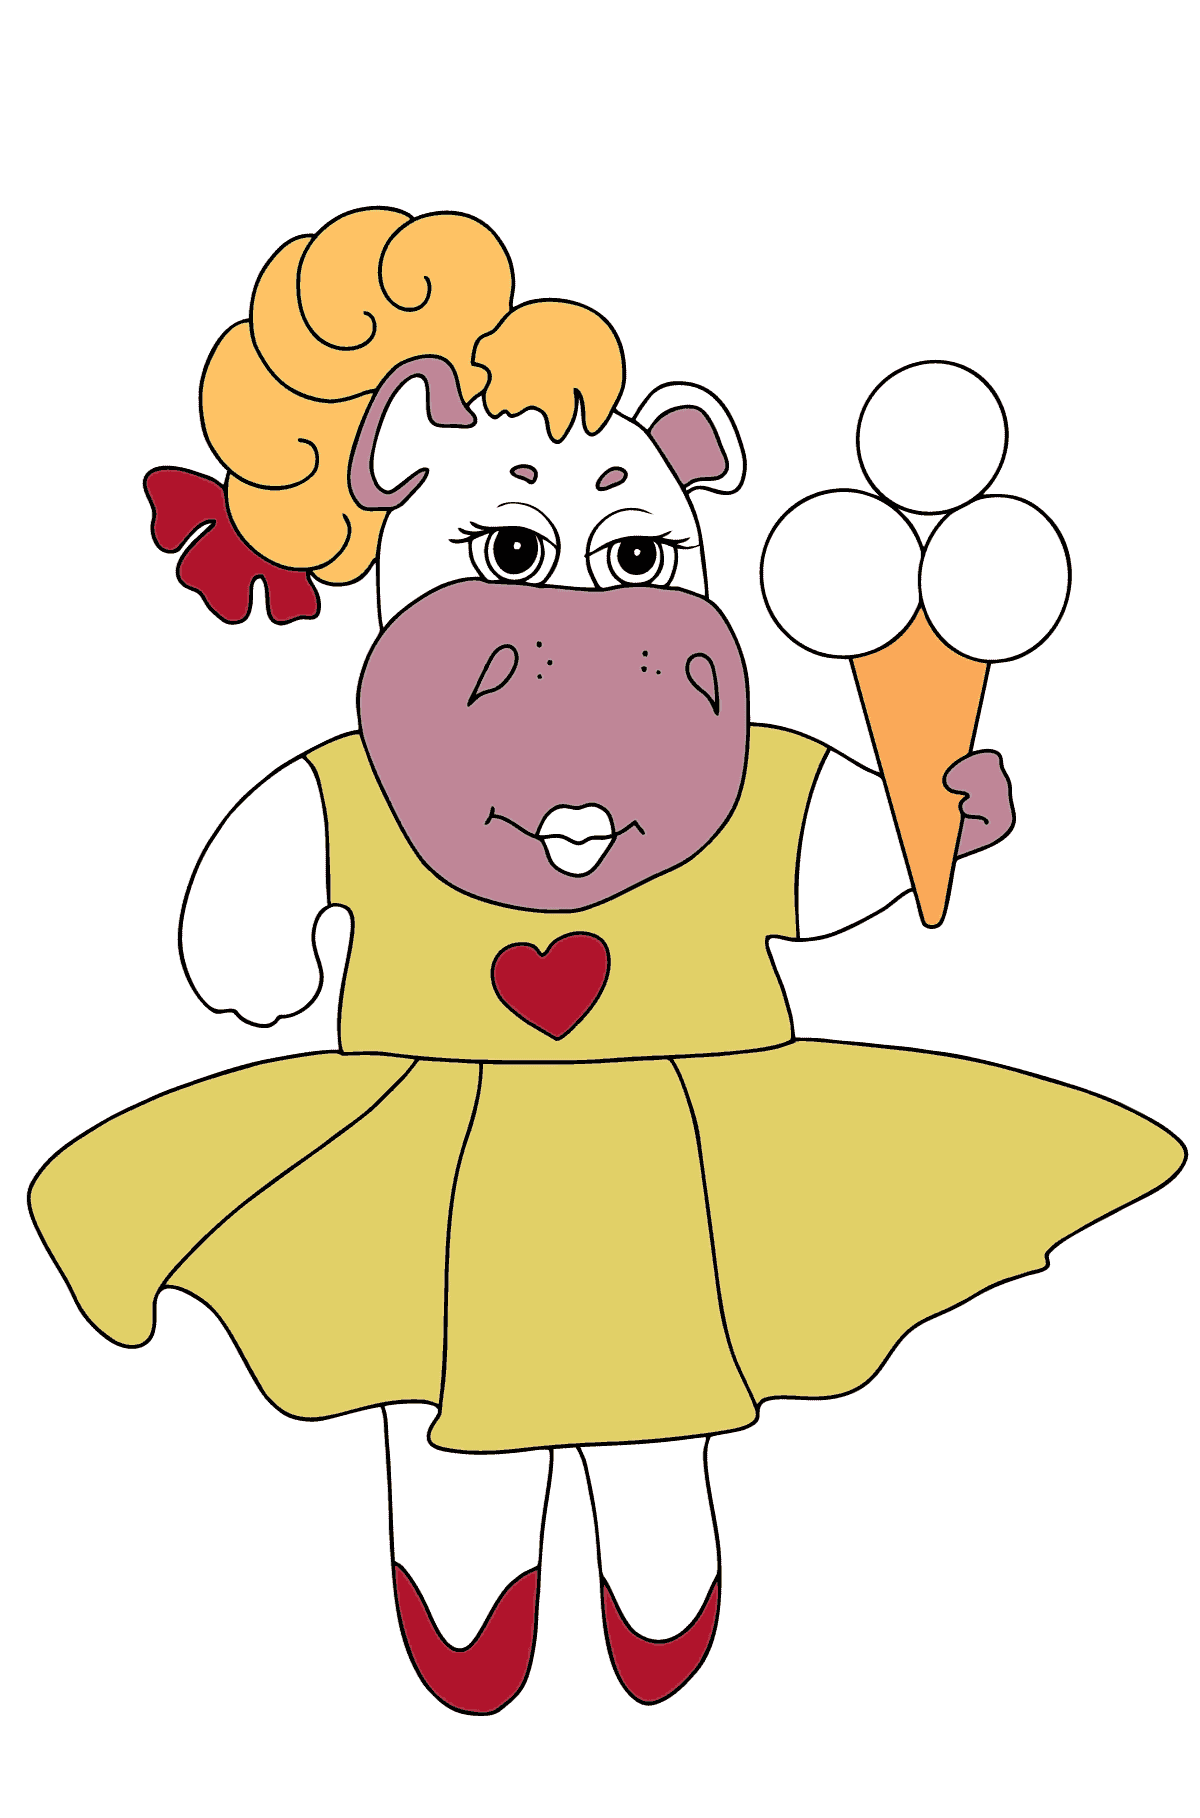 A Hippo in a Fancy Dress is Eating Ice Cream for Kids